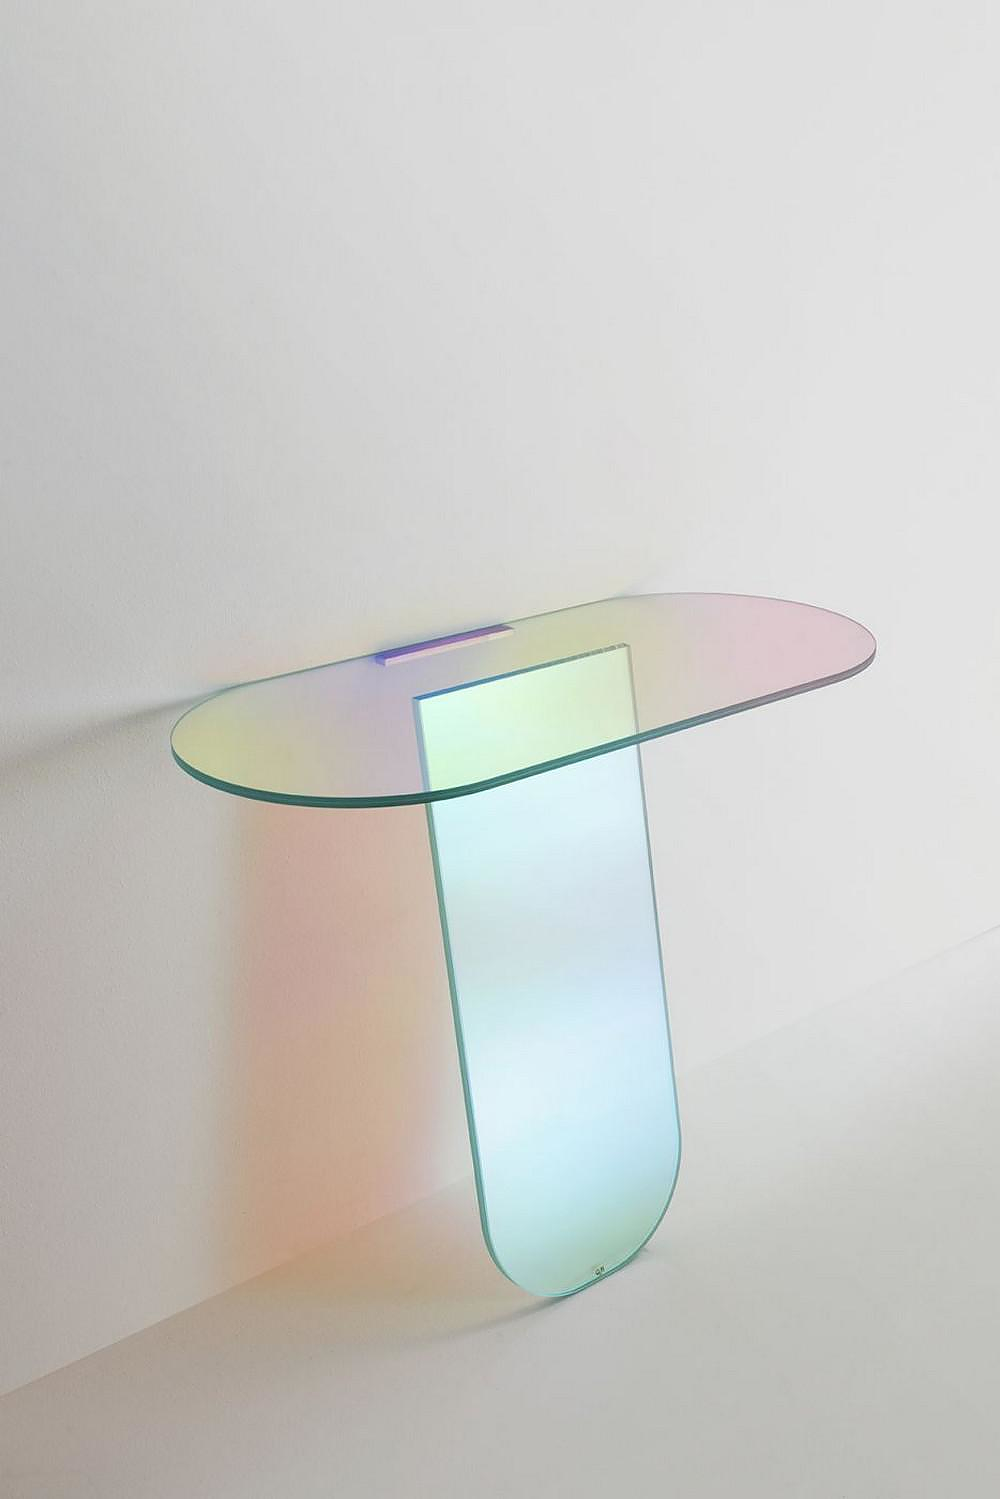 Shimmer Table Collection by Patricia Urquiola